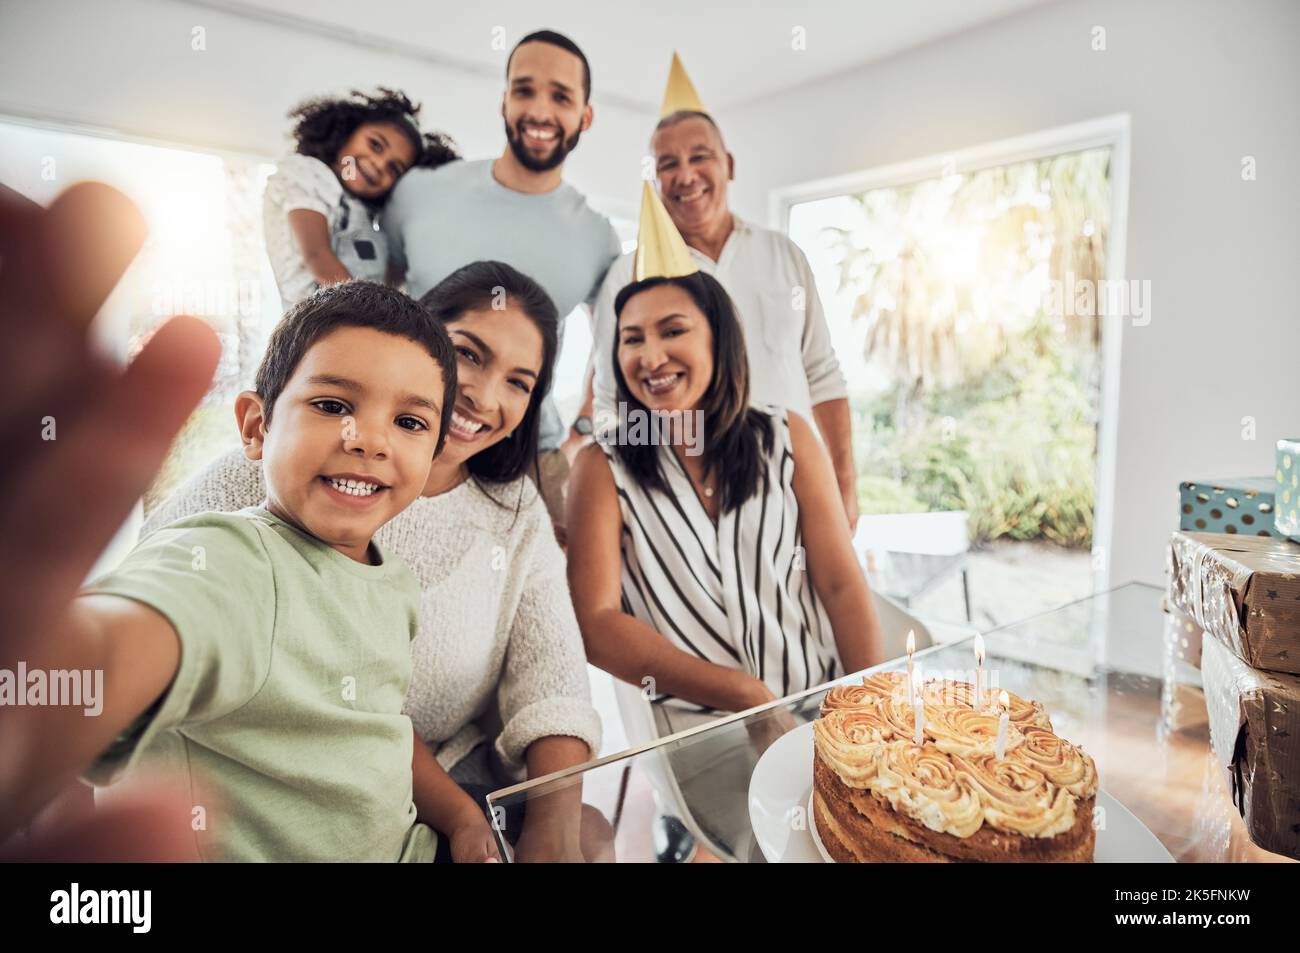 Happy birthday cake, selfie and big family celebration in home with portrait smile for memory or social media post. Puerto Rico people and children at Stock Photo